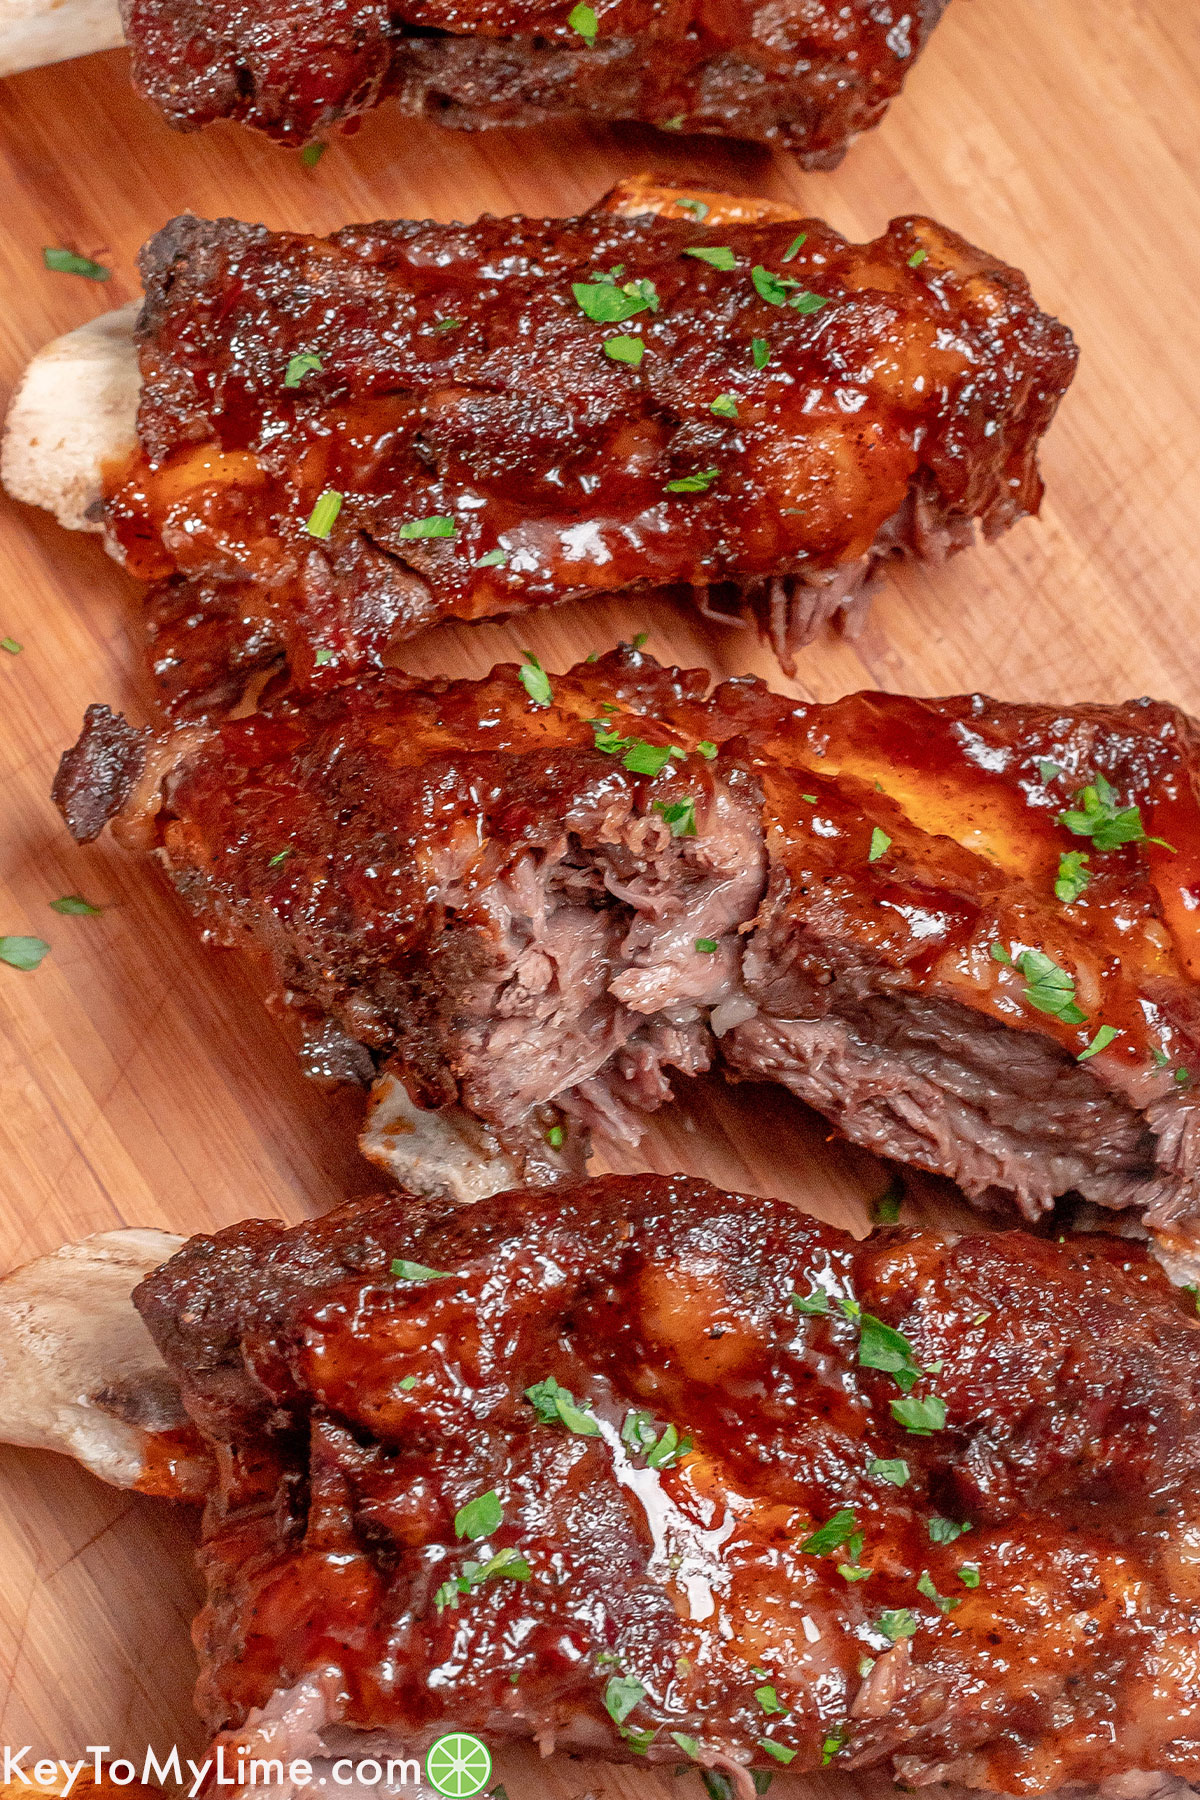 A close up image showing the texture of the saucy ribs.